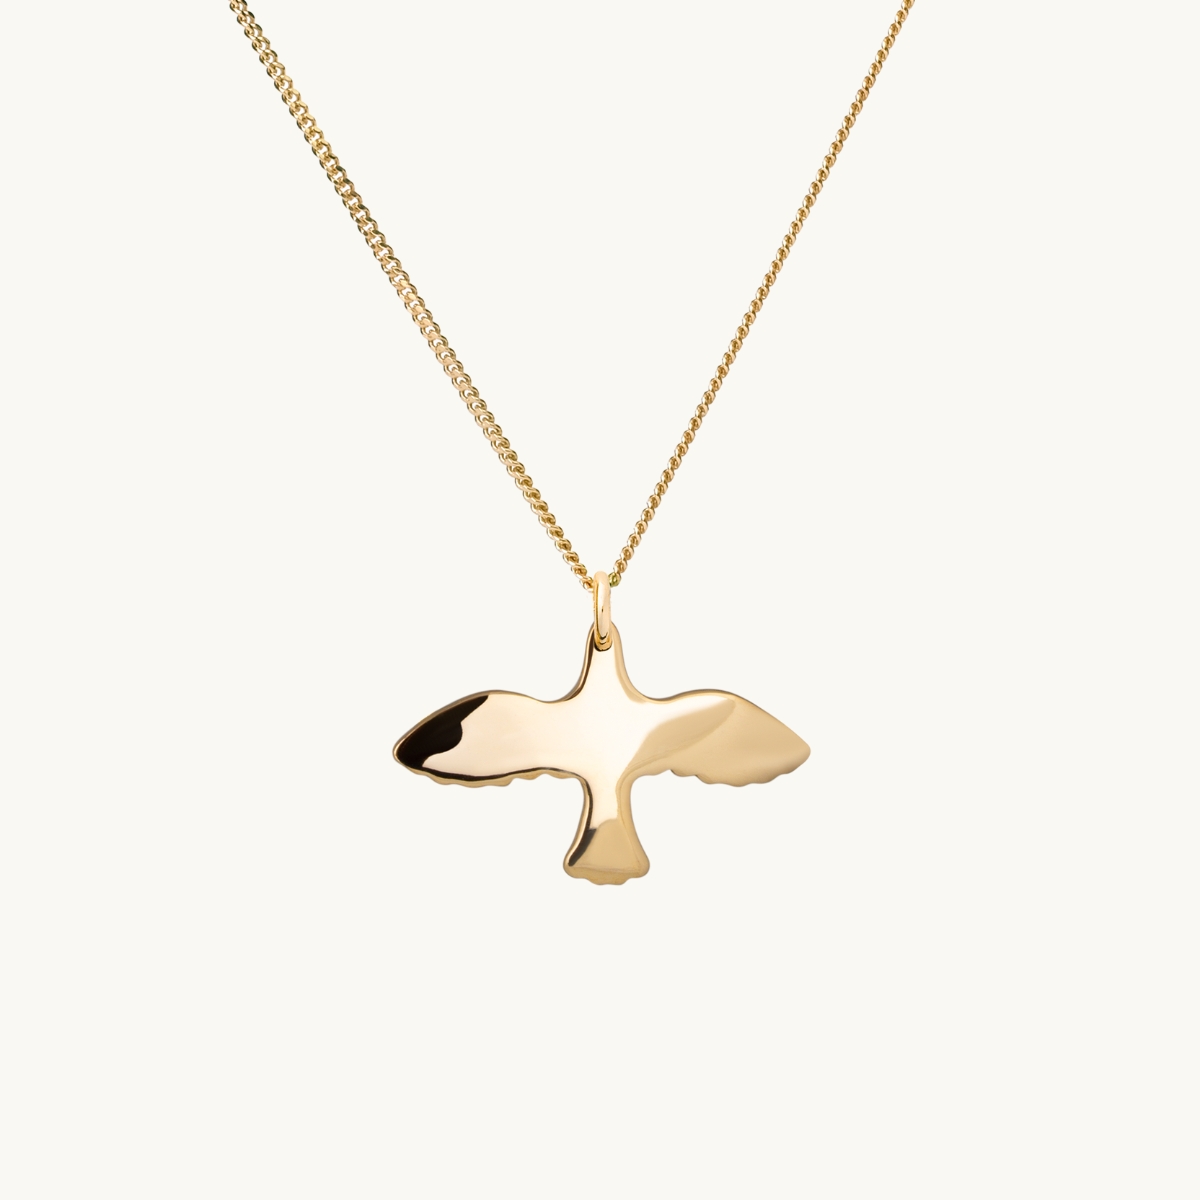 GOLDEN SMALL DOVE NECKLACE - 40 CM in the group SHOP / NECKLACES at EMMA ISRAELSSON (neck029-40)